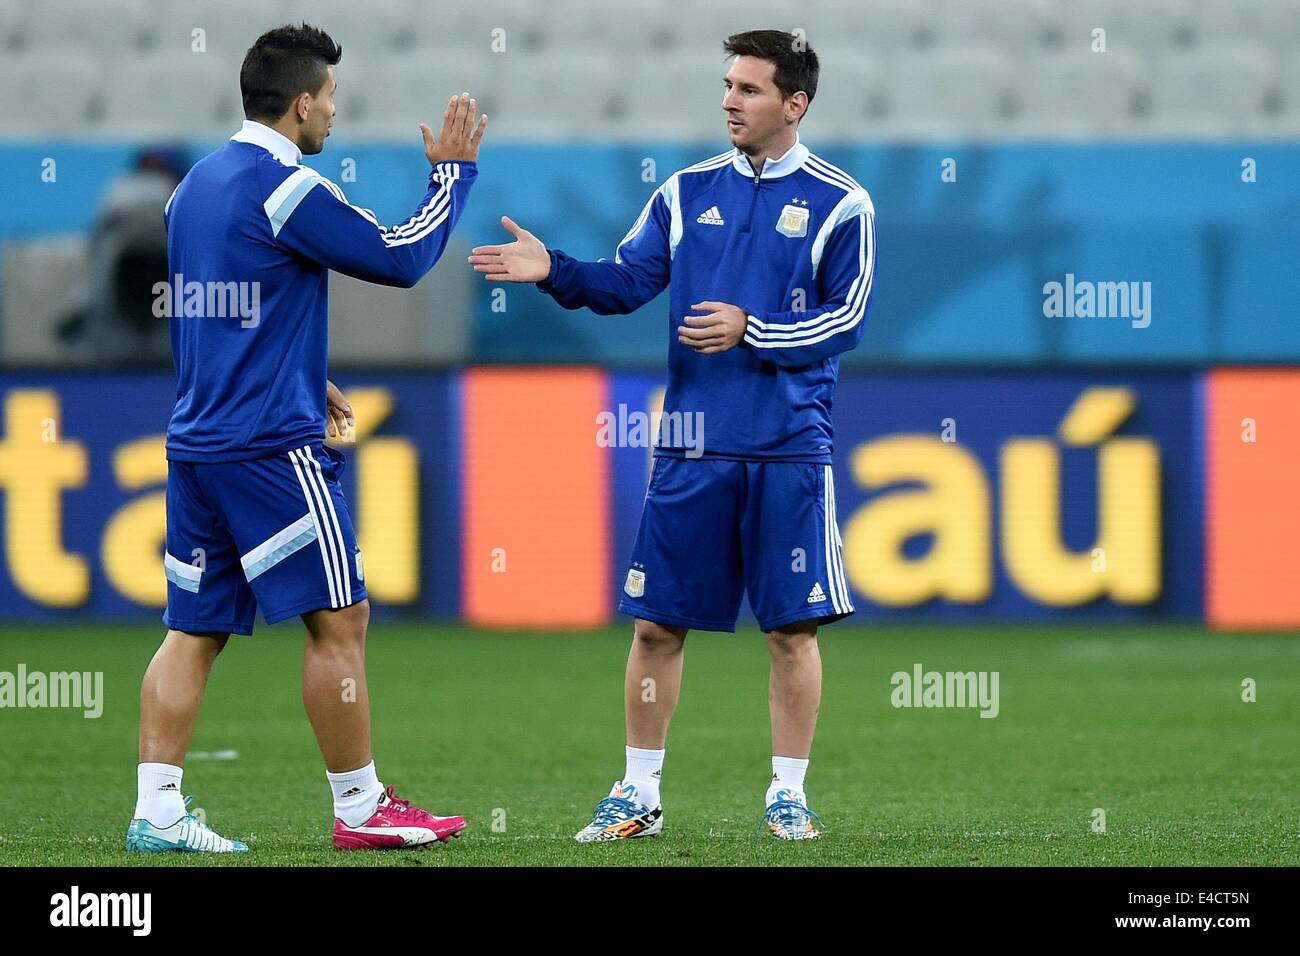 Sao Paulo, Brazil. 08th July, 2014. Argentina's Lionel Messi (R) and Sergio Aguero practices during a training session at the Arena Corinthians in Sao Paulo, Brazil, 08 July 2014. Argentina will play a FIFA World Cup semi final match against the Netherlands on 09 July 2014. Photo: Marius Becker/dpa/Alamy Live News Stock Photo